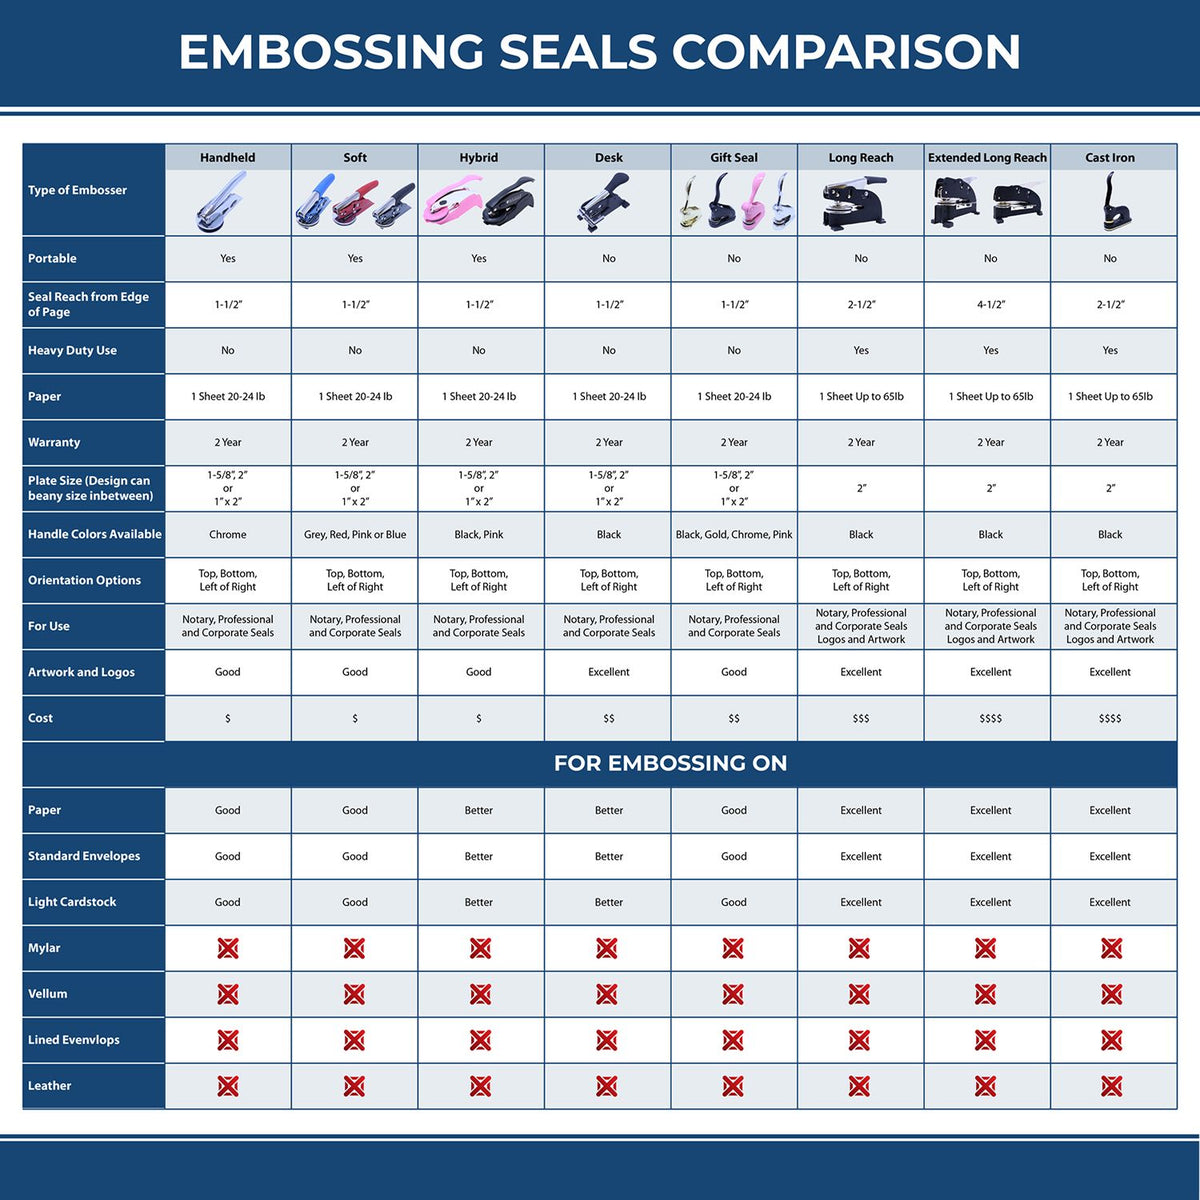 A comparison chart for the different types of mount models available for the Long Reach Arkansas Land Surveyor Seal.